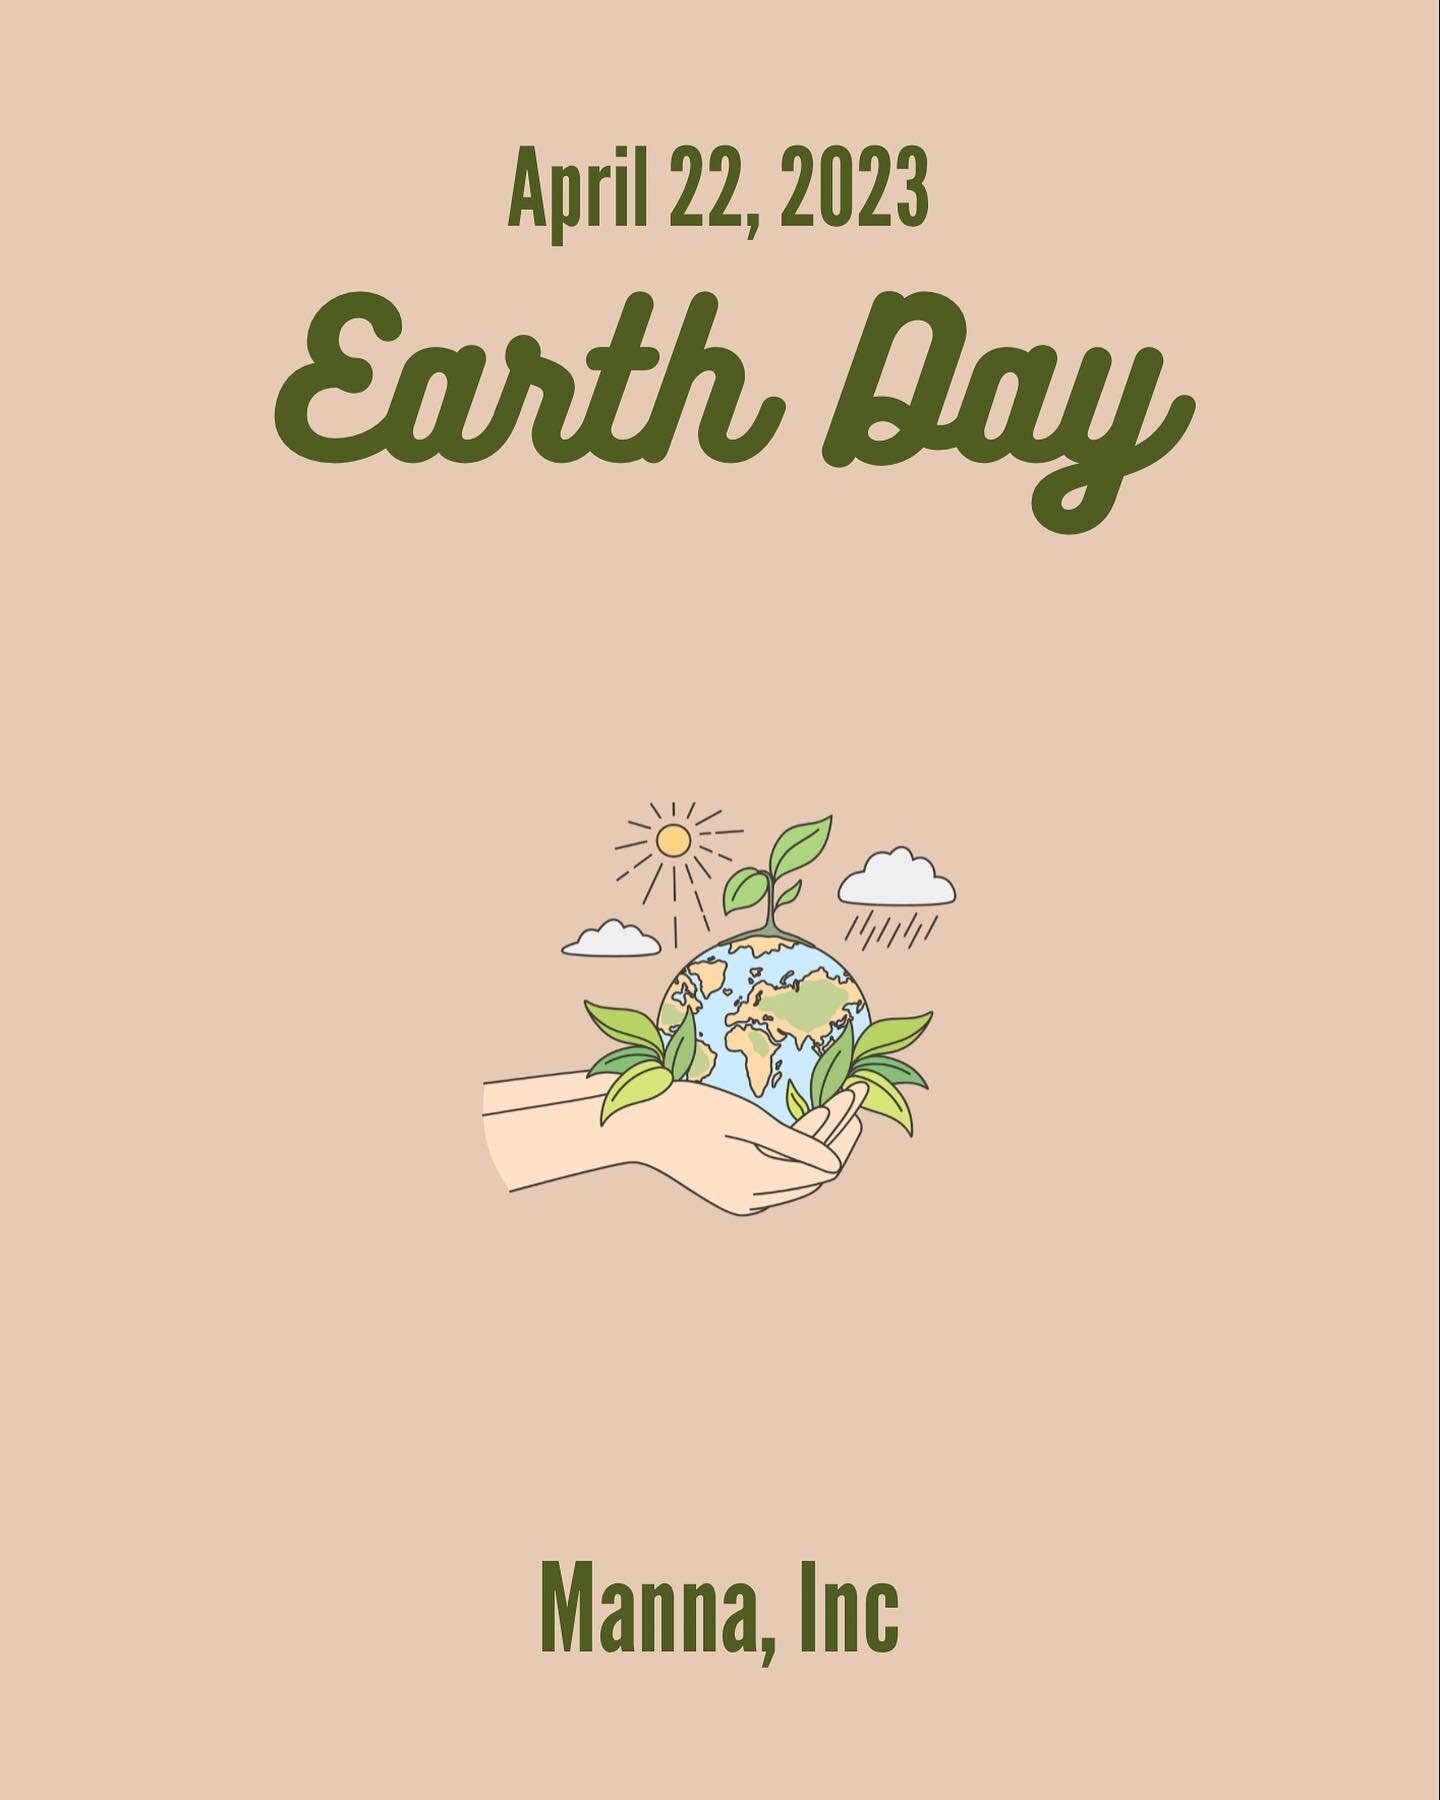 Earth Day is this weekend. At Manna, Inc we have incorporated climate-proof construction into our building renovations, so that every day, we celebrate a greener earth. Our intentional, eco-friendly green roof lowers air conditioning and heating cost